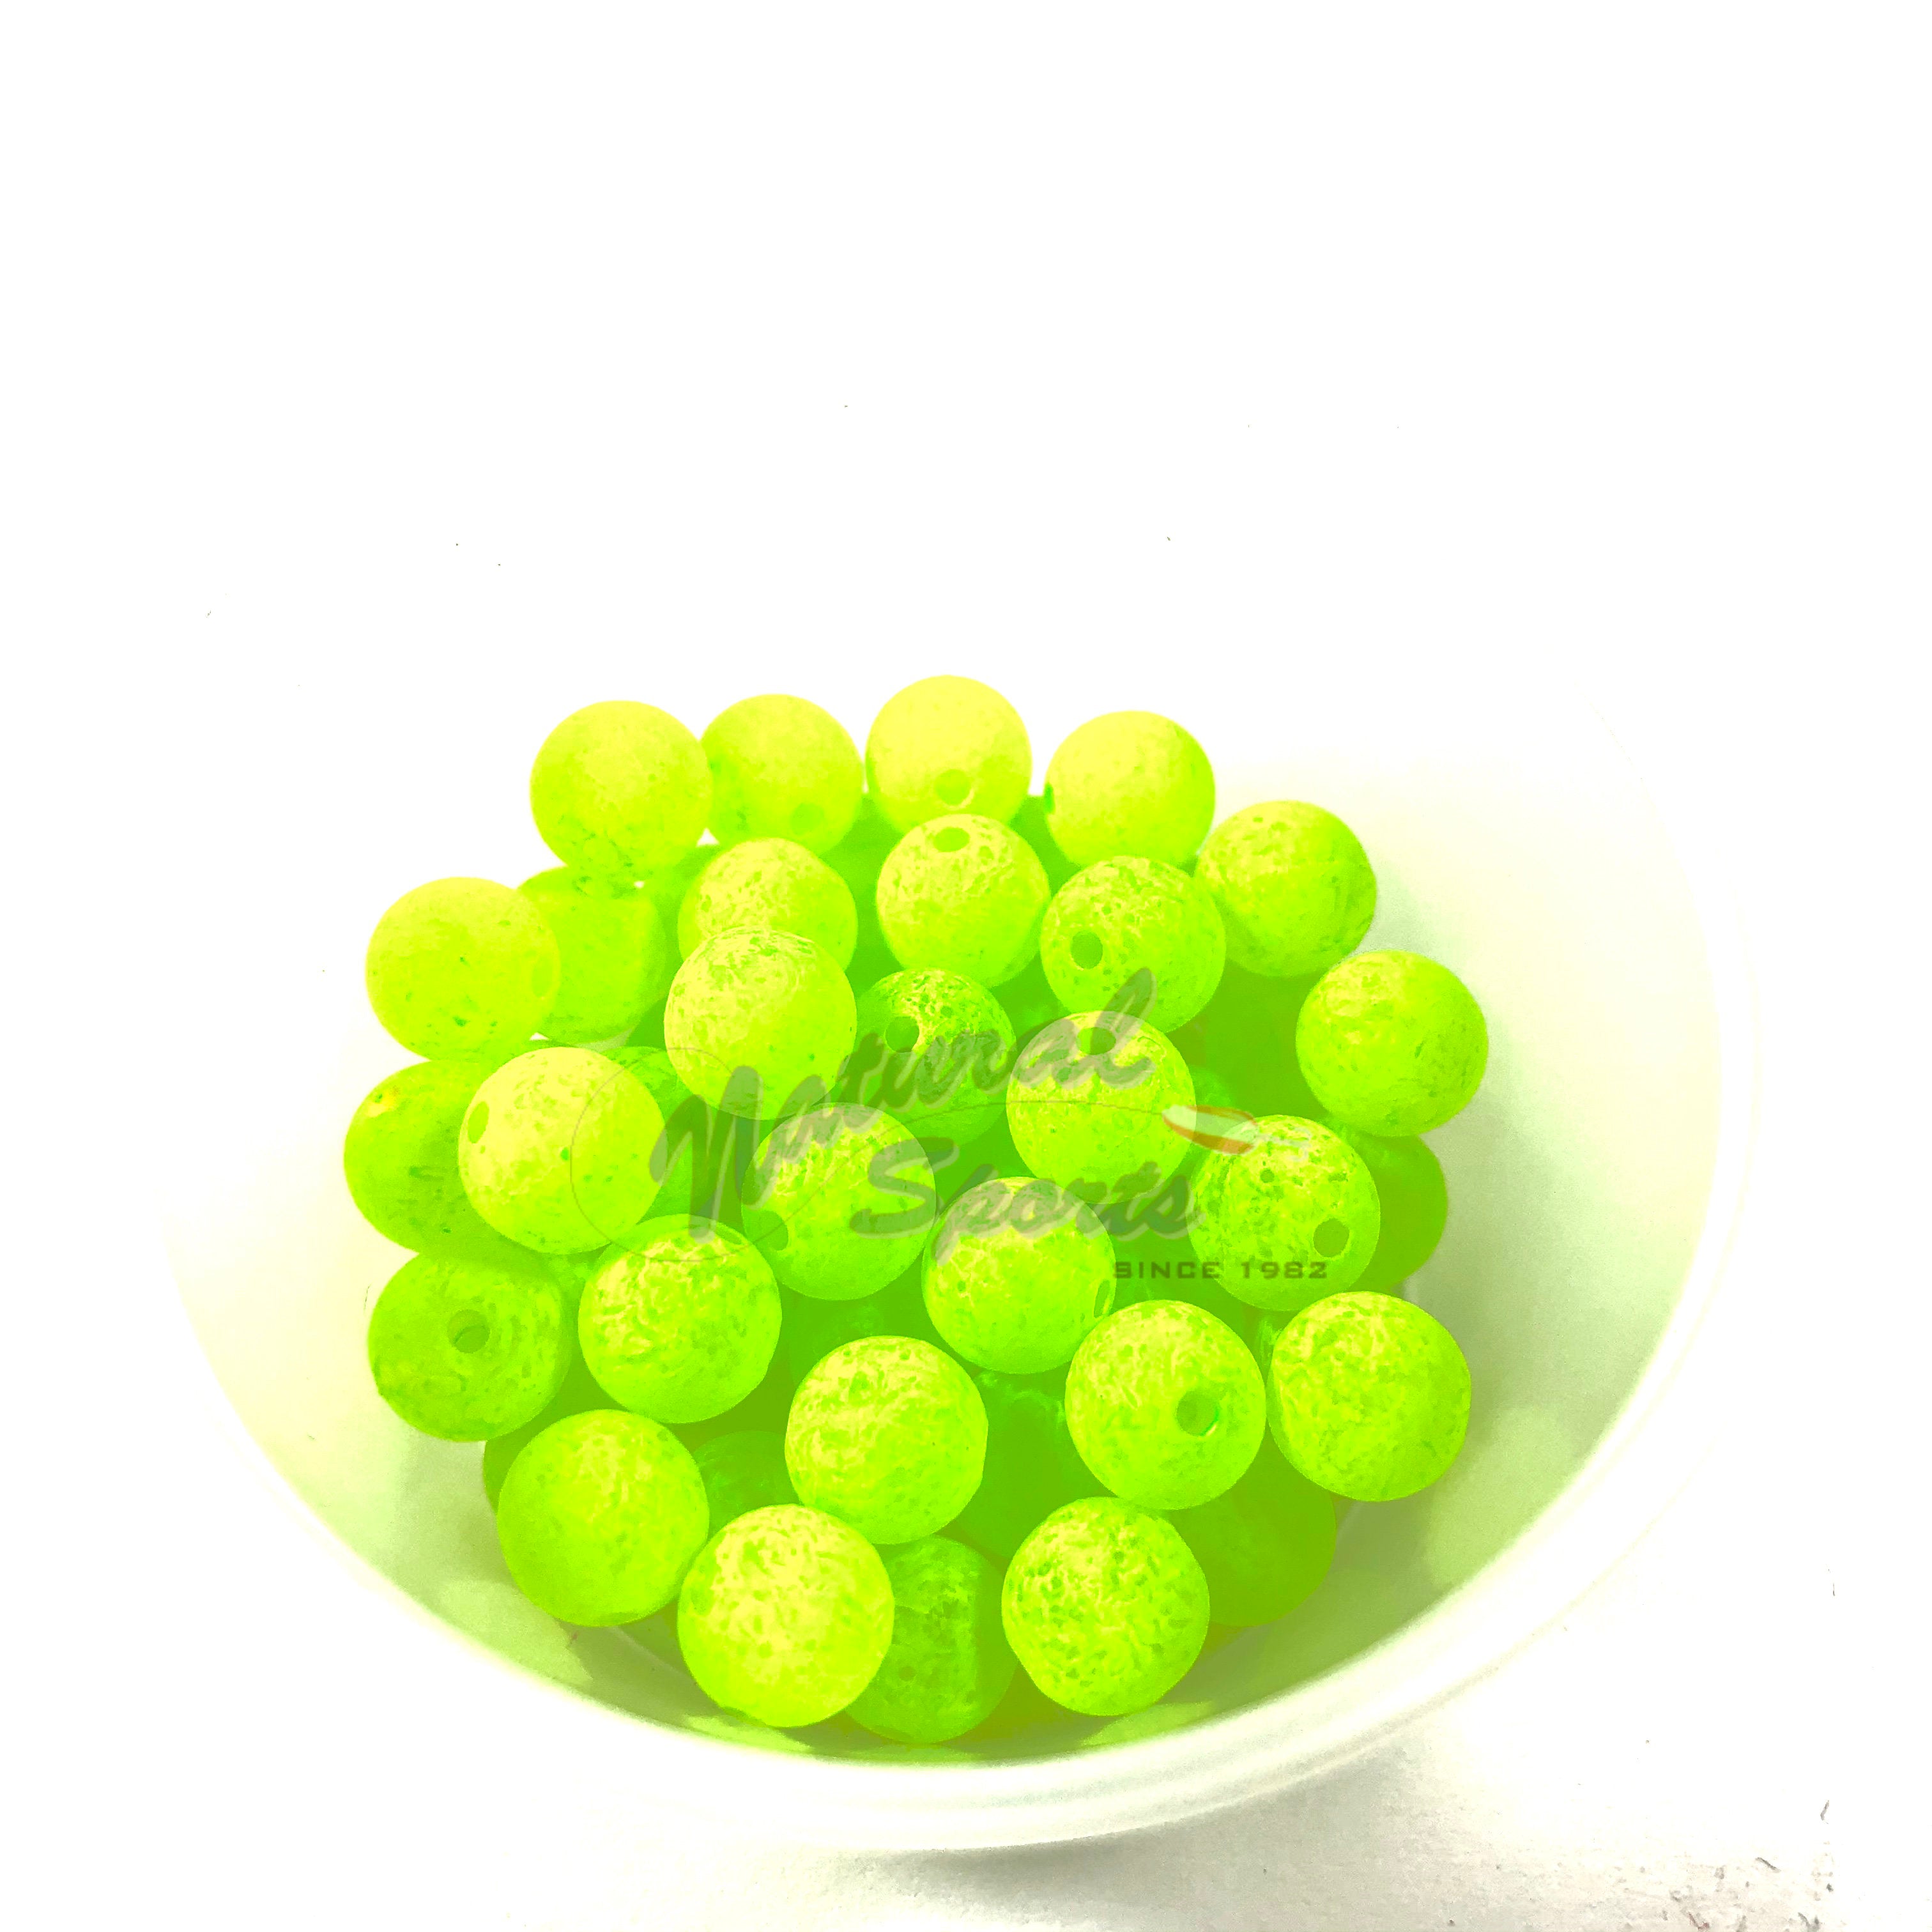 Mad River UV Steelie Beads – Natural Sports - The Fishing Store